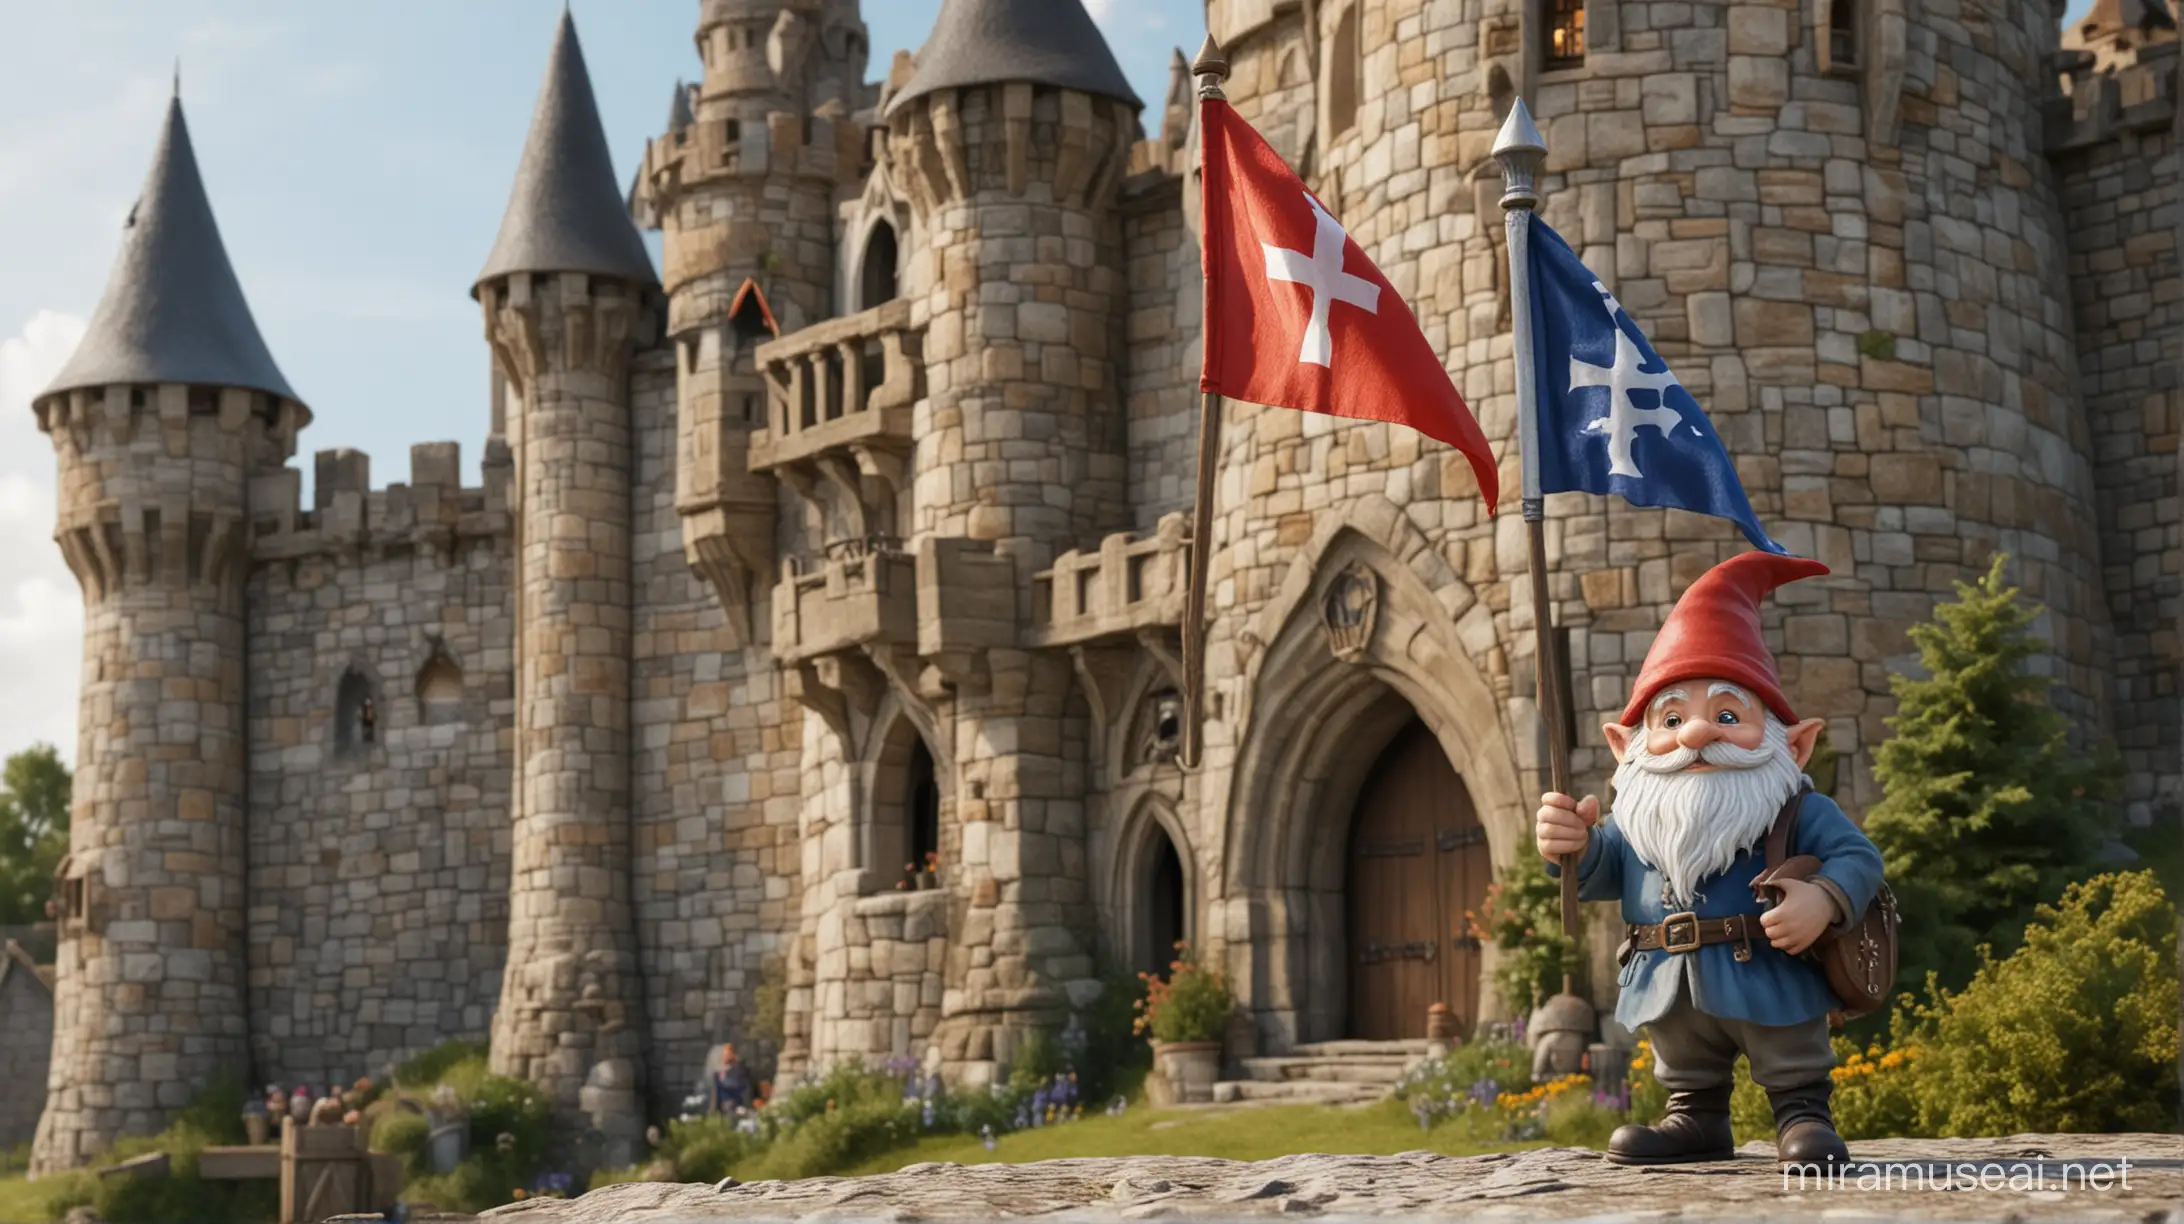 A gnome is holding a castle flag